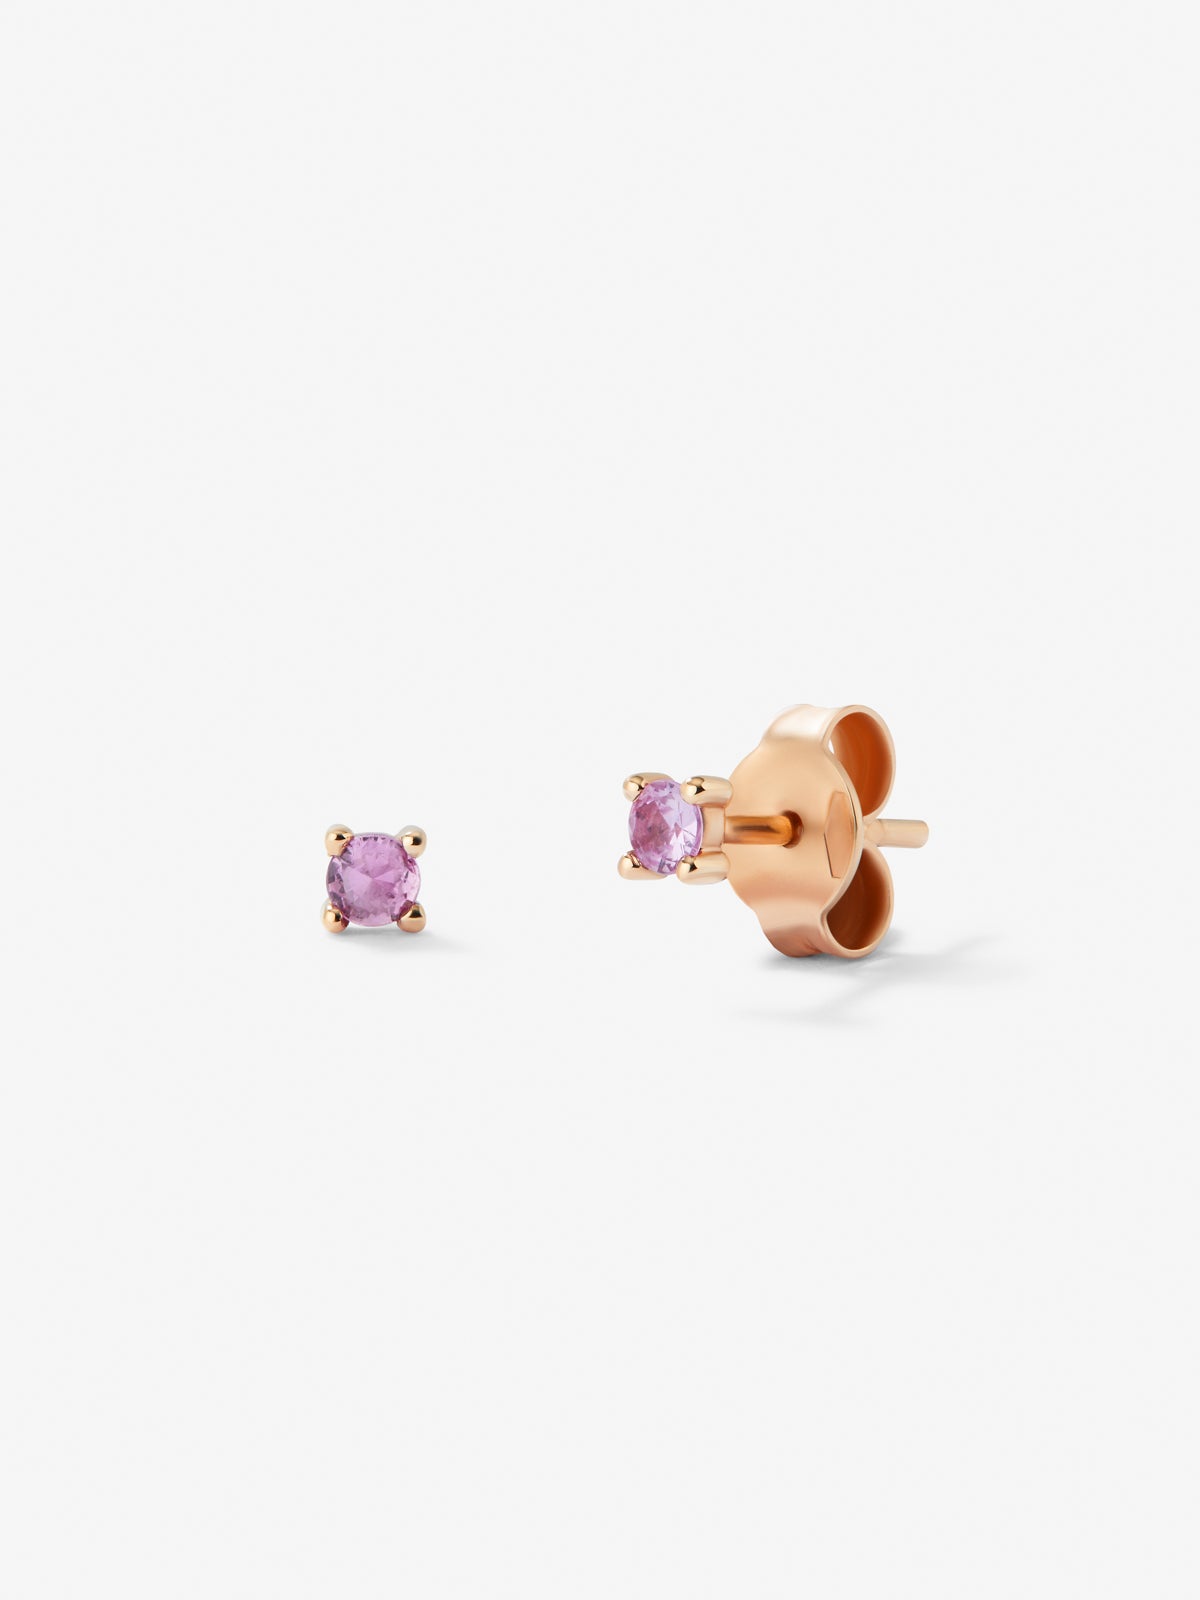 18K rose gold earrings with 2 brilliant-cut pink sapphires with a total of 0.12 cts